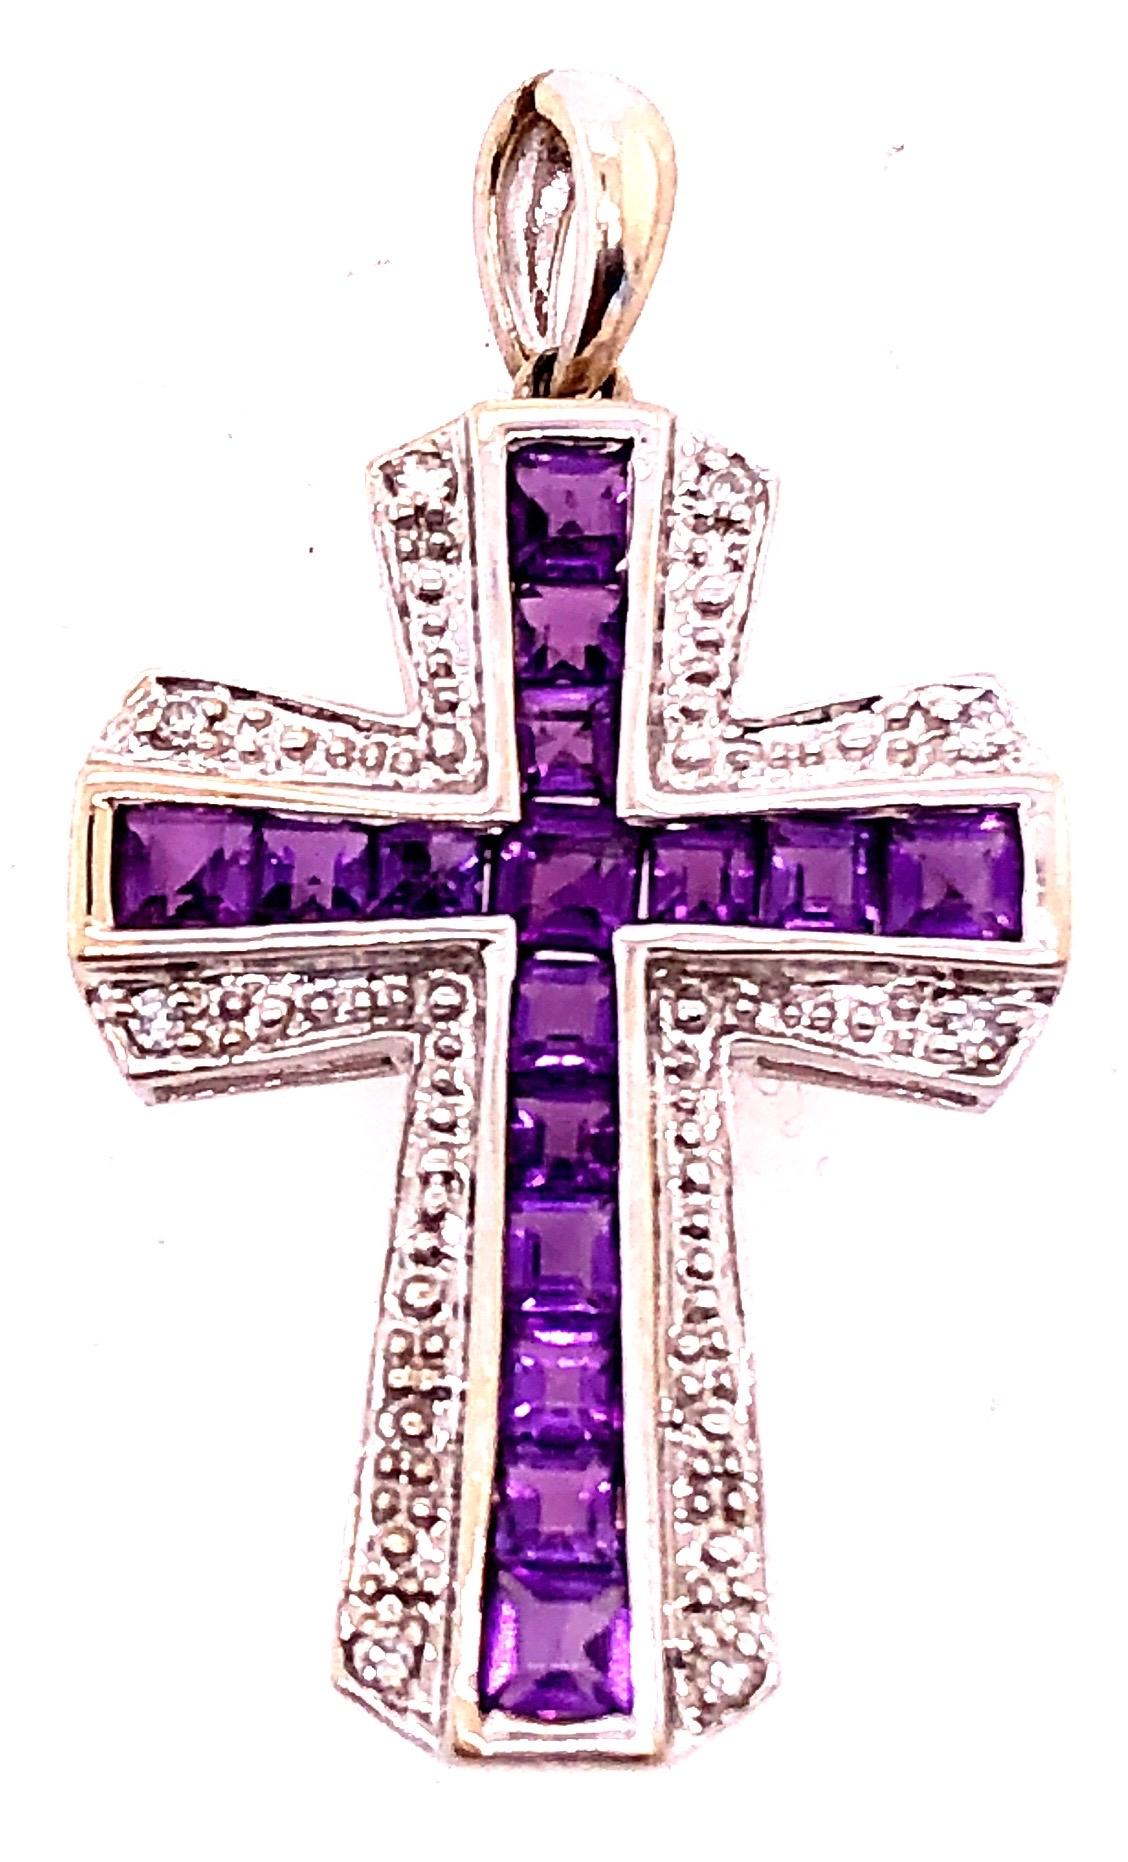 14 Karat Yellow and White Gold Charm Pendant with Diamond and Amethyst.
8 piece round diamond and 16 piece square cushion amethyst.
3 grams total weight
30.78 height